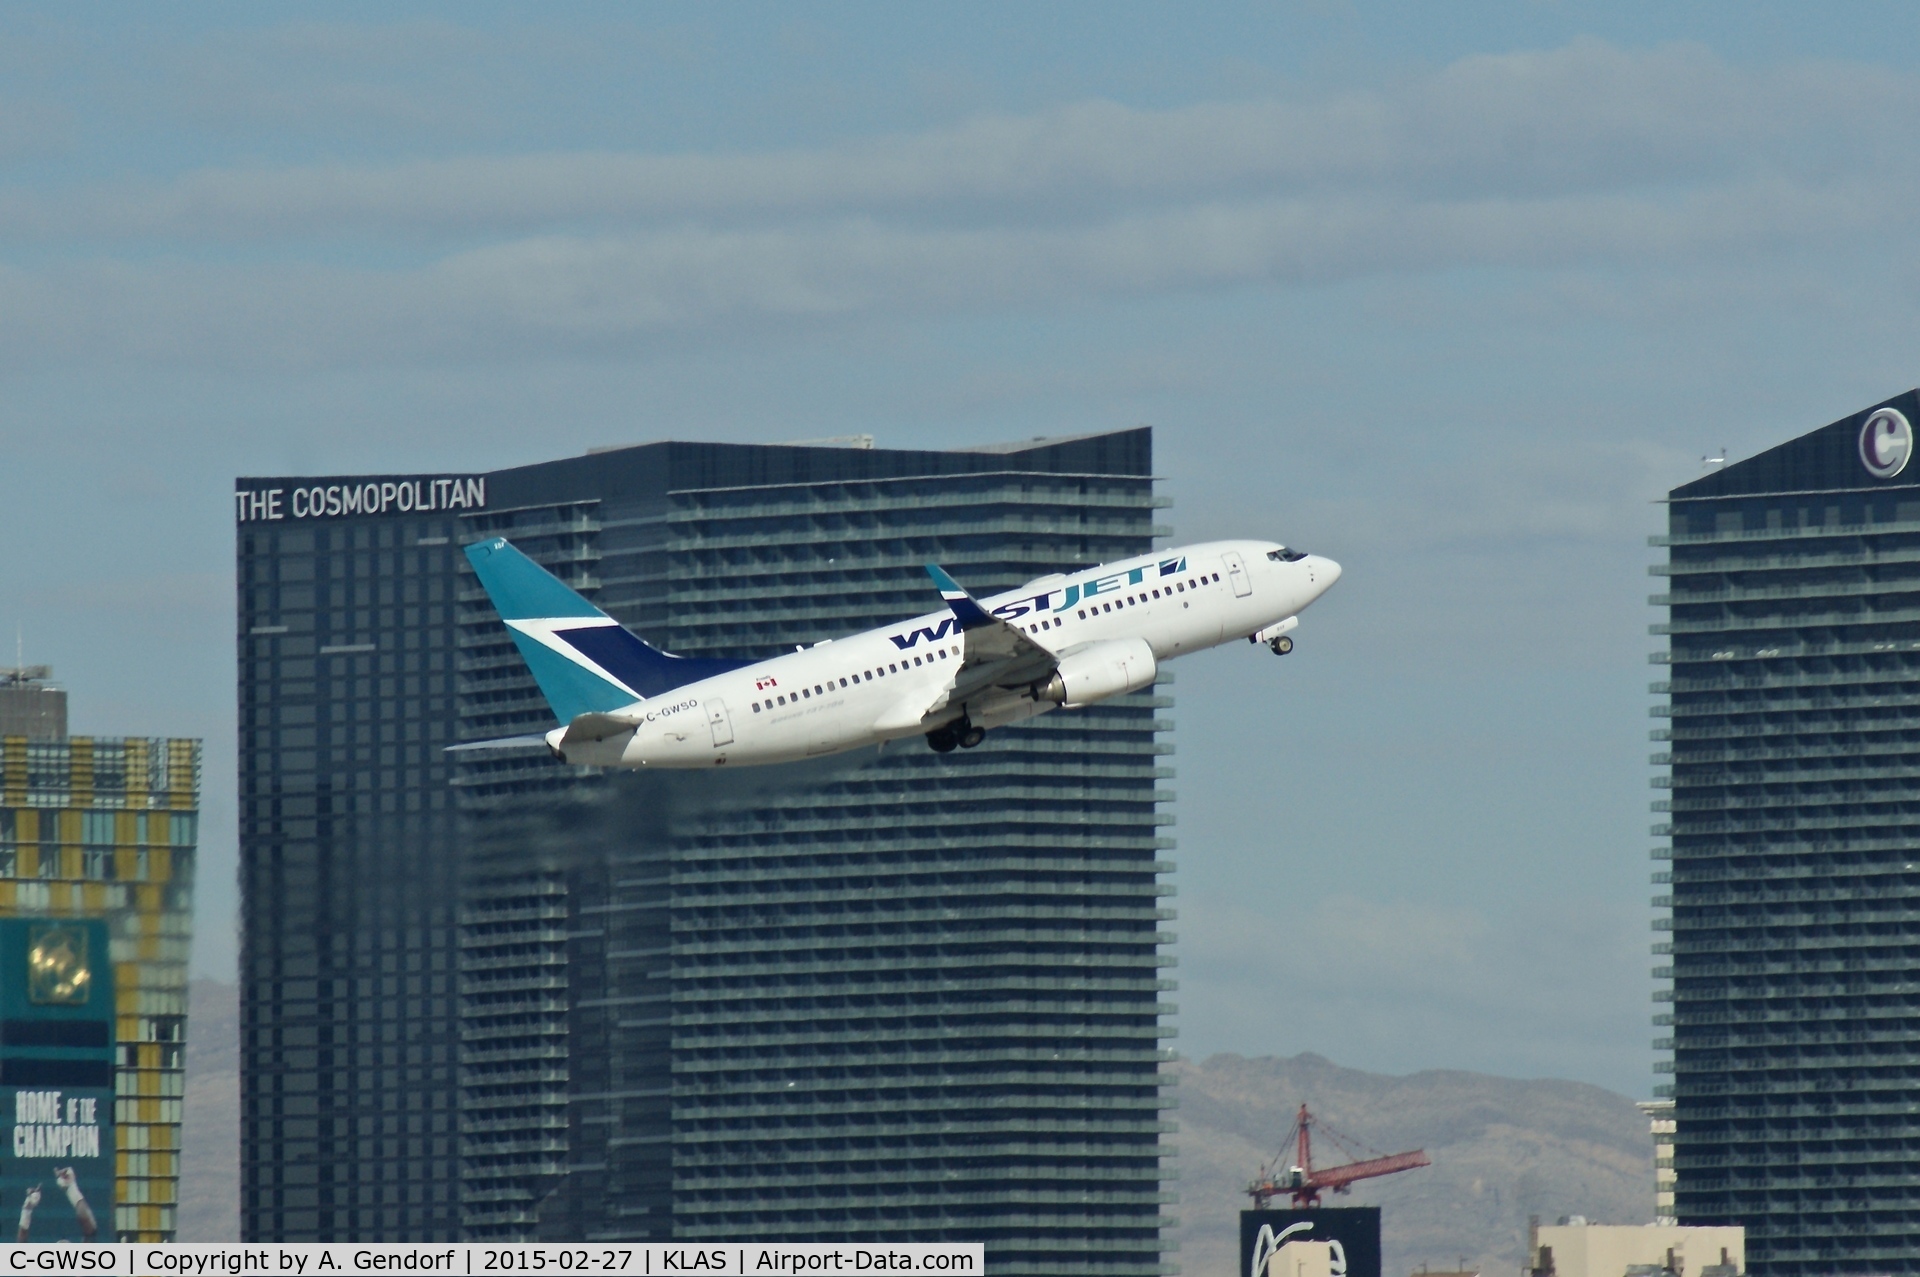 C-GWSO, 2009 Boeing 737-7CT C/N 37090, WestJet Airlines, is here climbing out Las Vegas Int'l(KLAS) with the Cosmopolitan Hotel in the background